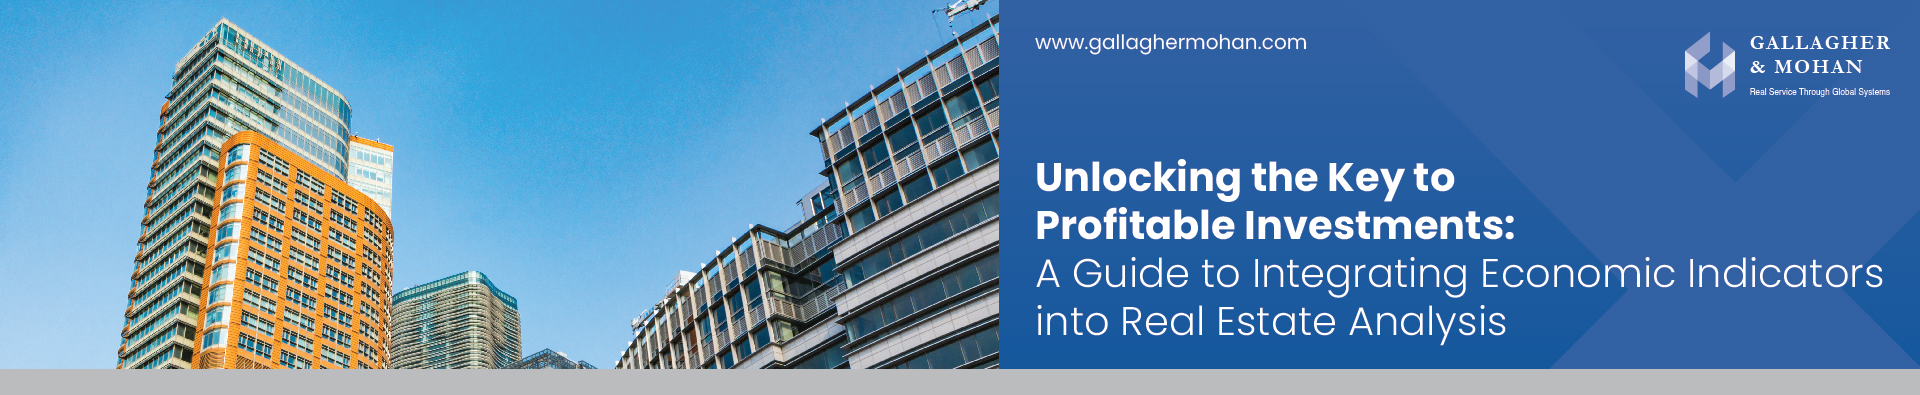 Unlocking The Key To Profitable Investments A Guide To Integrating Economic Indicators Into Real Estate Analysis